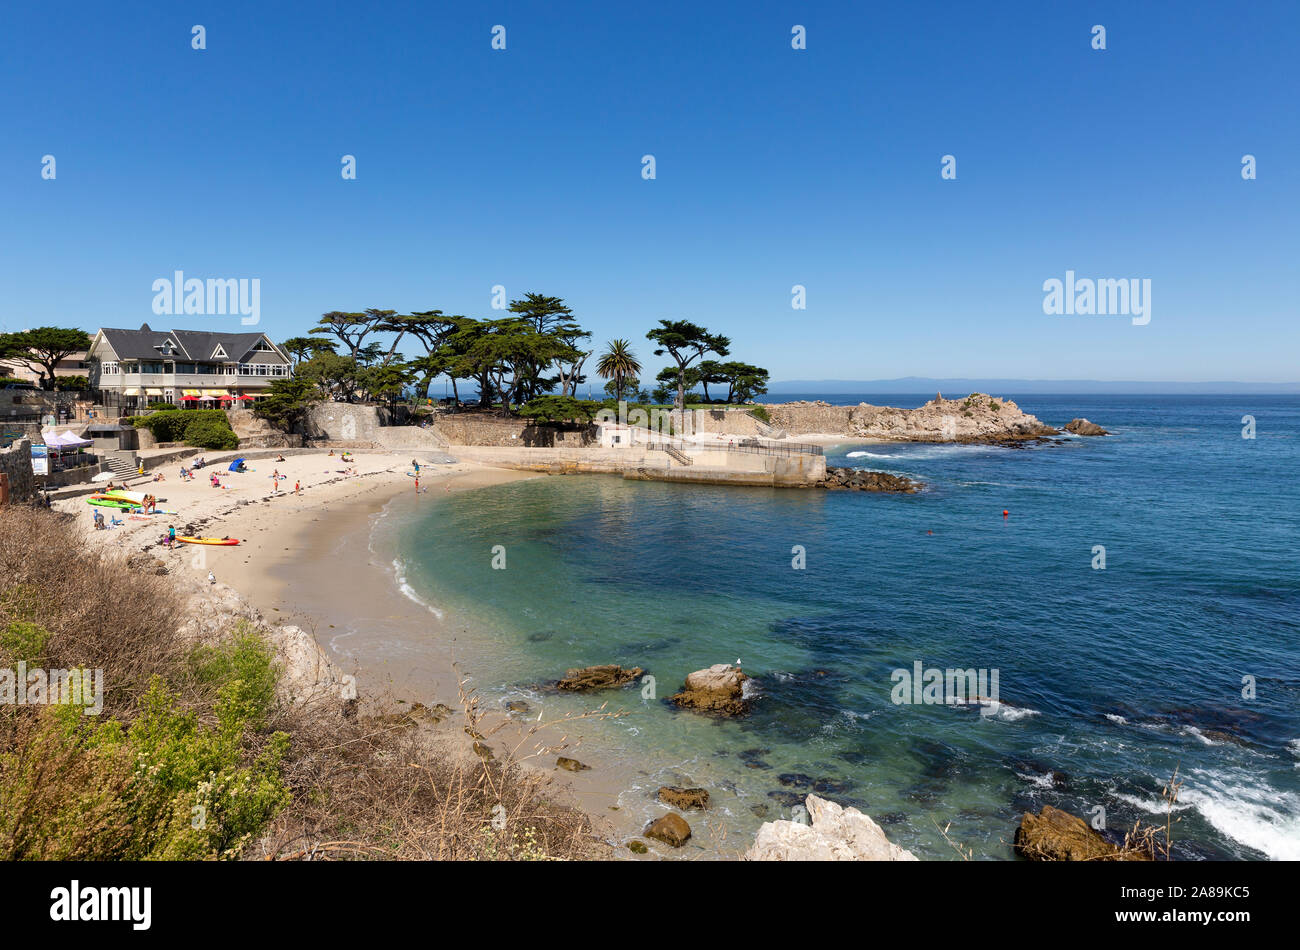 MONTEREY, USA - SEPTEMBER 24, 2019 : People enjoying a sunny day at Lover's Point beach on California's Central coast. Stock Photo